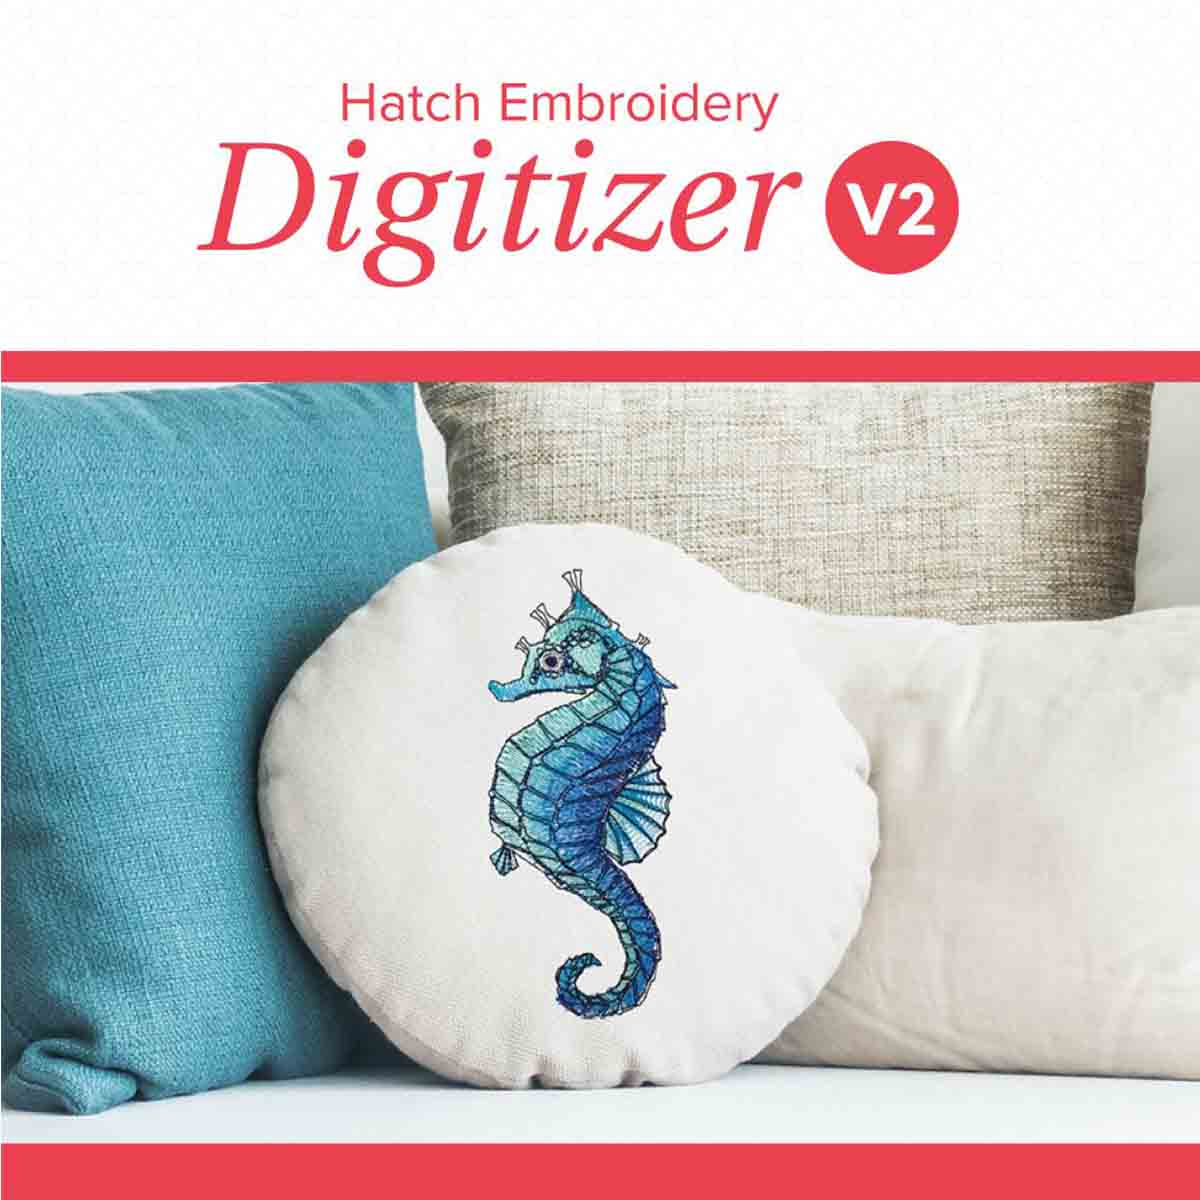 hatch embroidery software